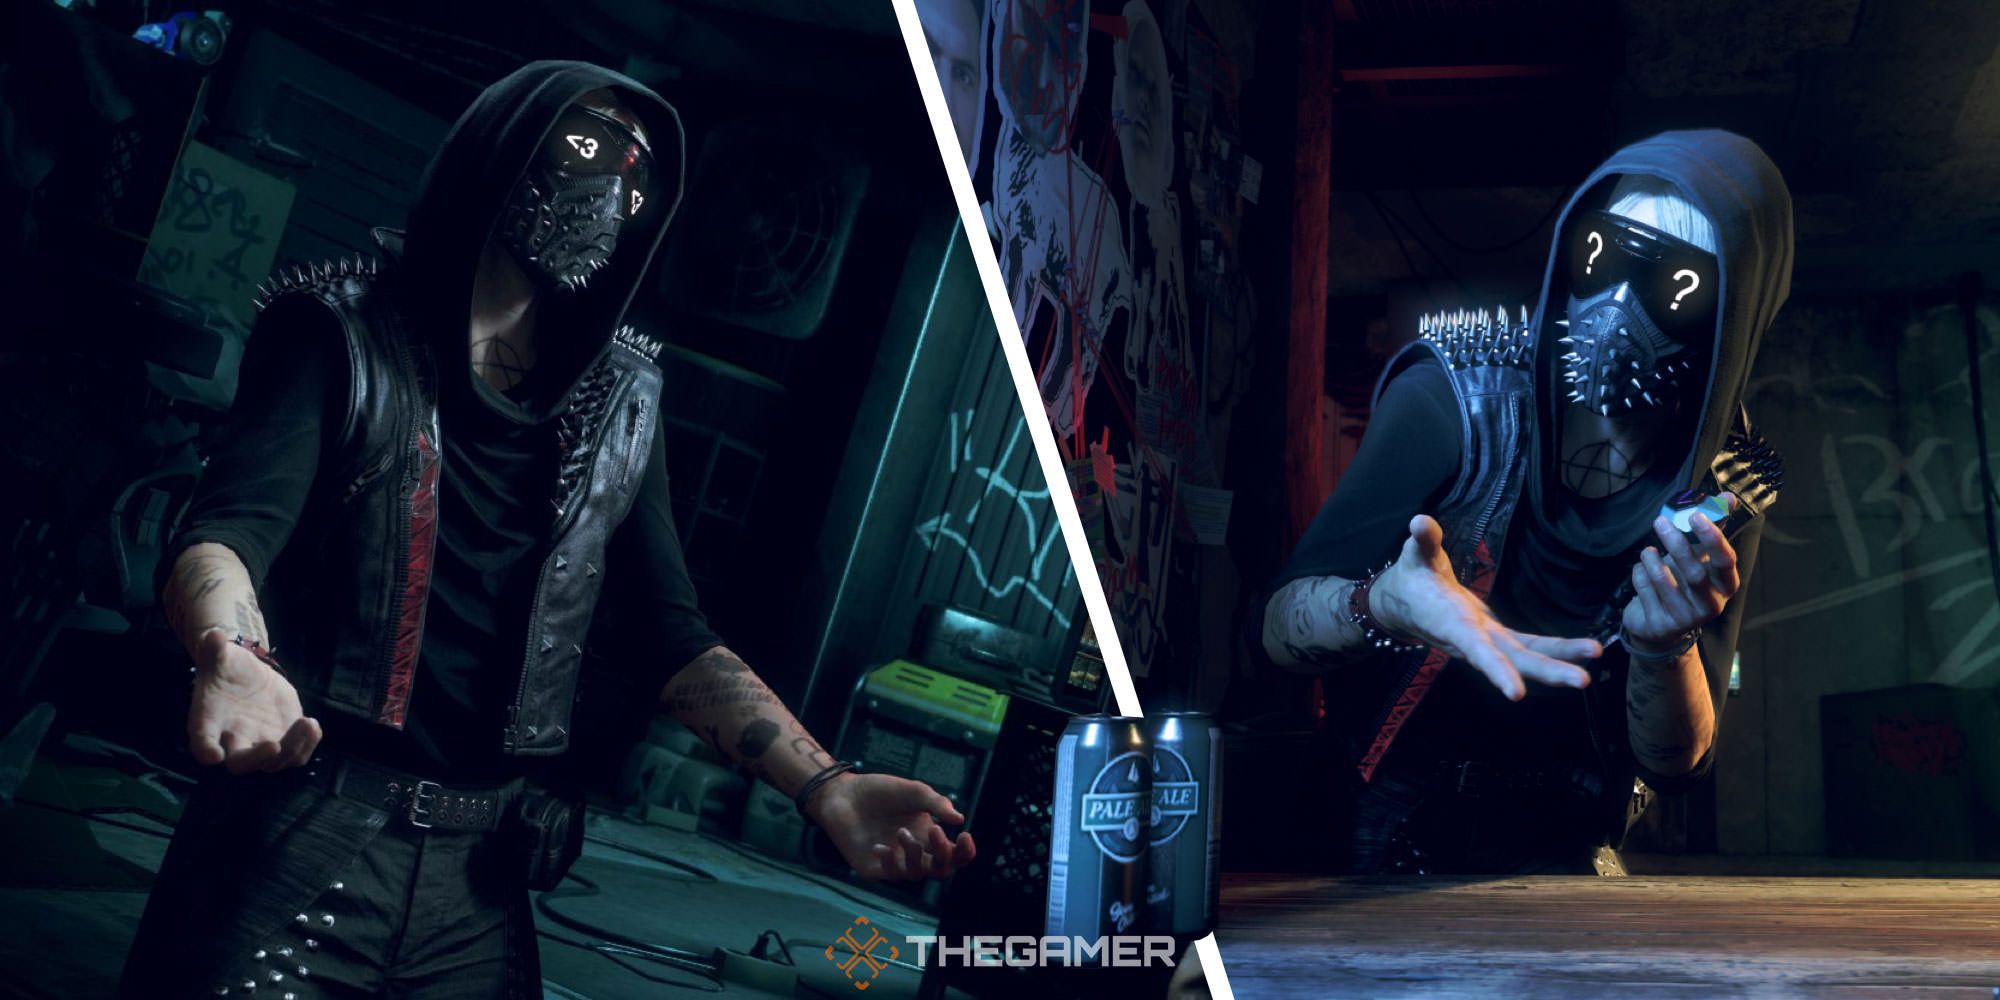 Watch Dogs: Legion: Behind the Scenes of Bloodline Expansion, Ubisoft [NA]